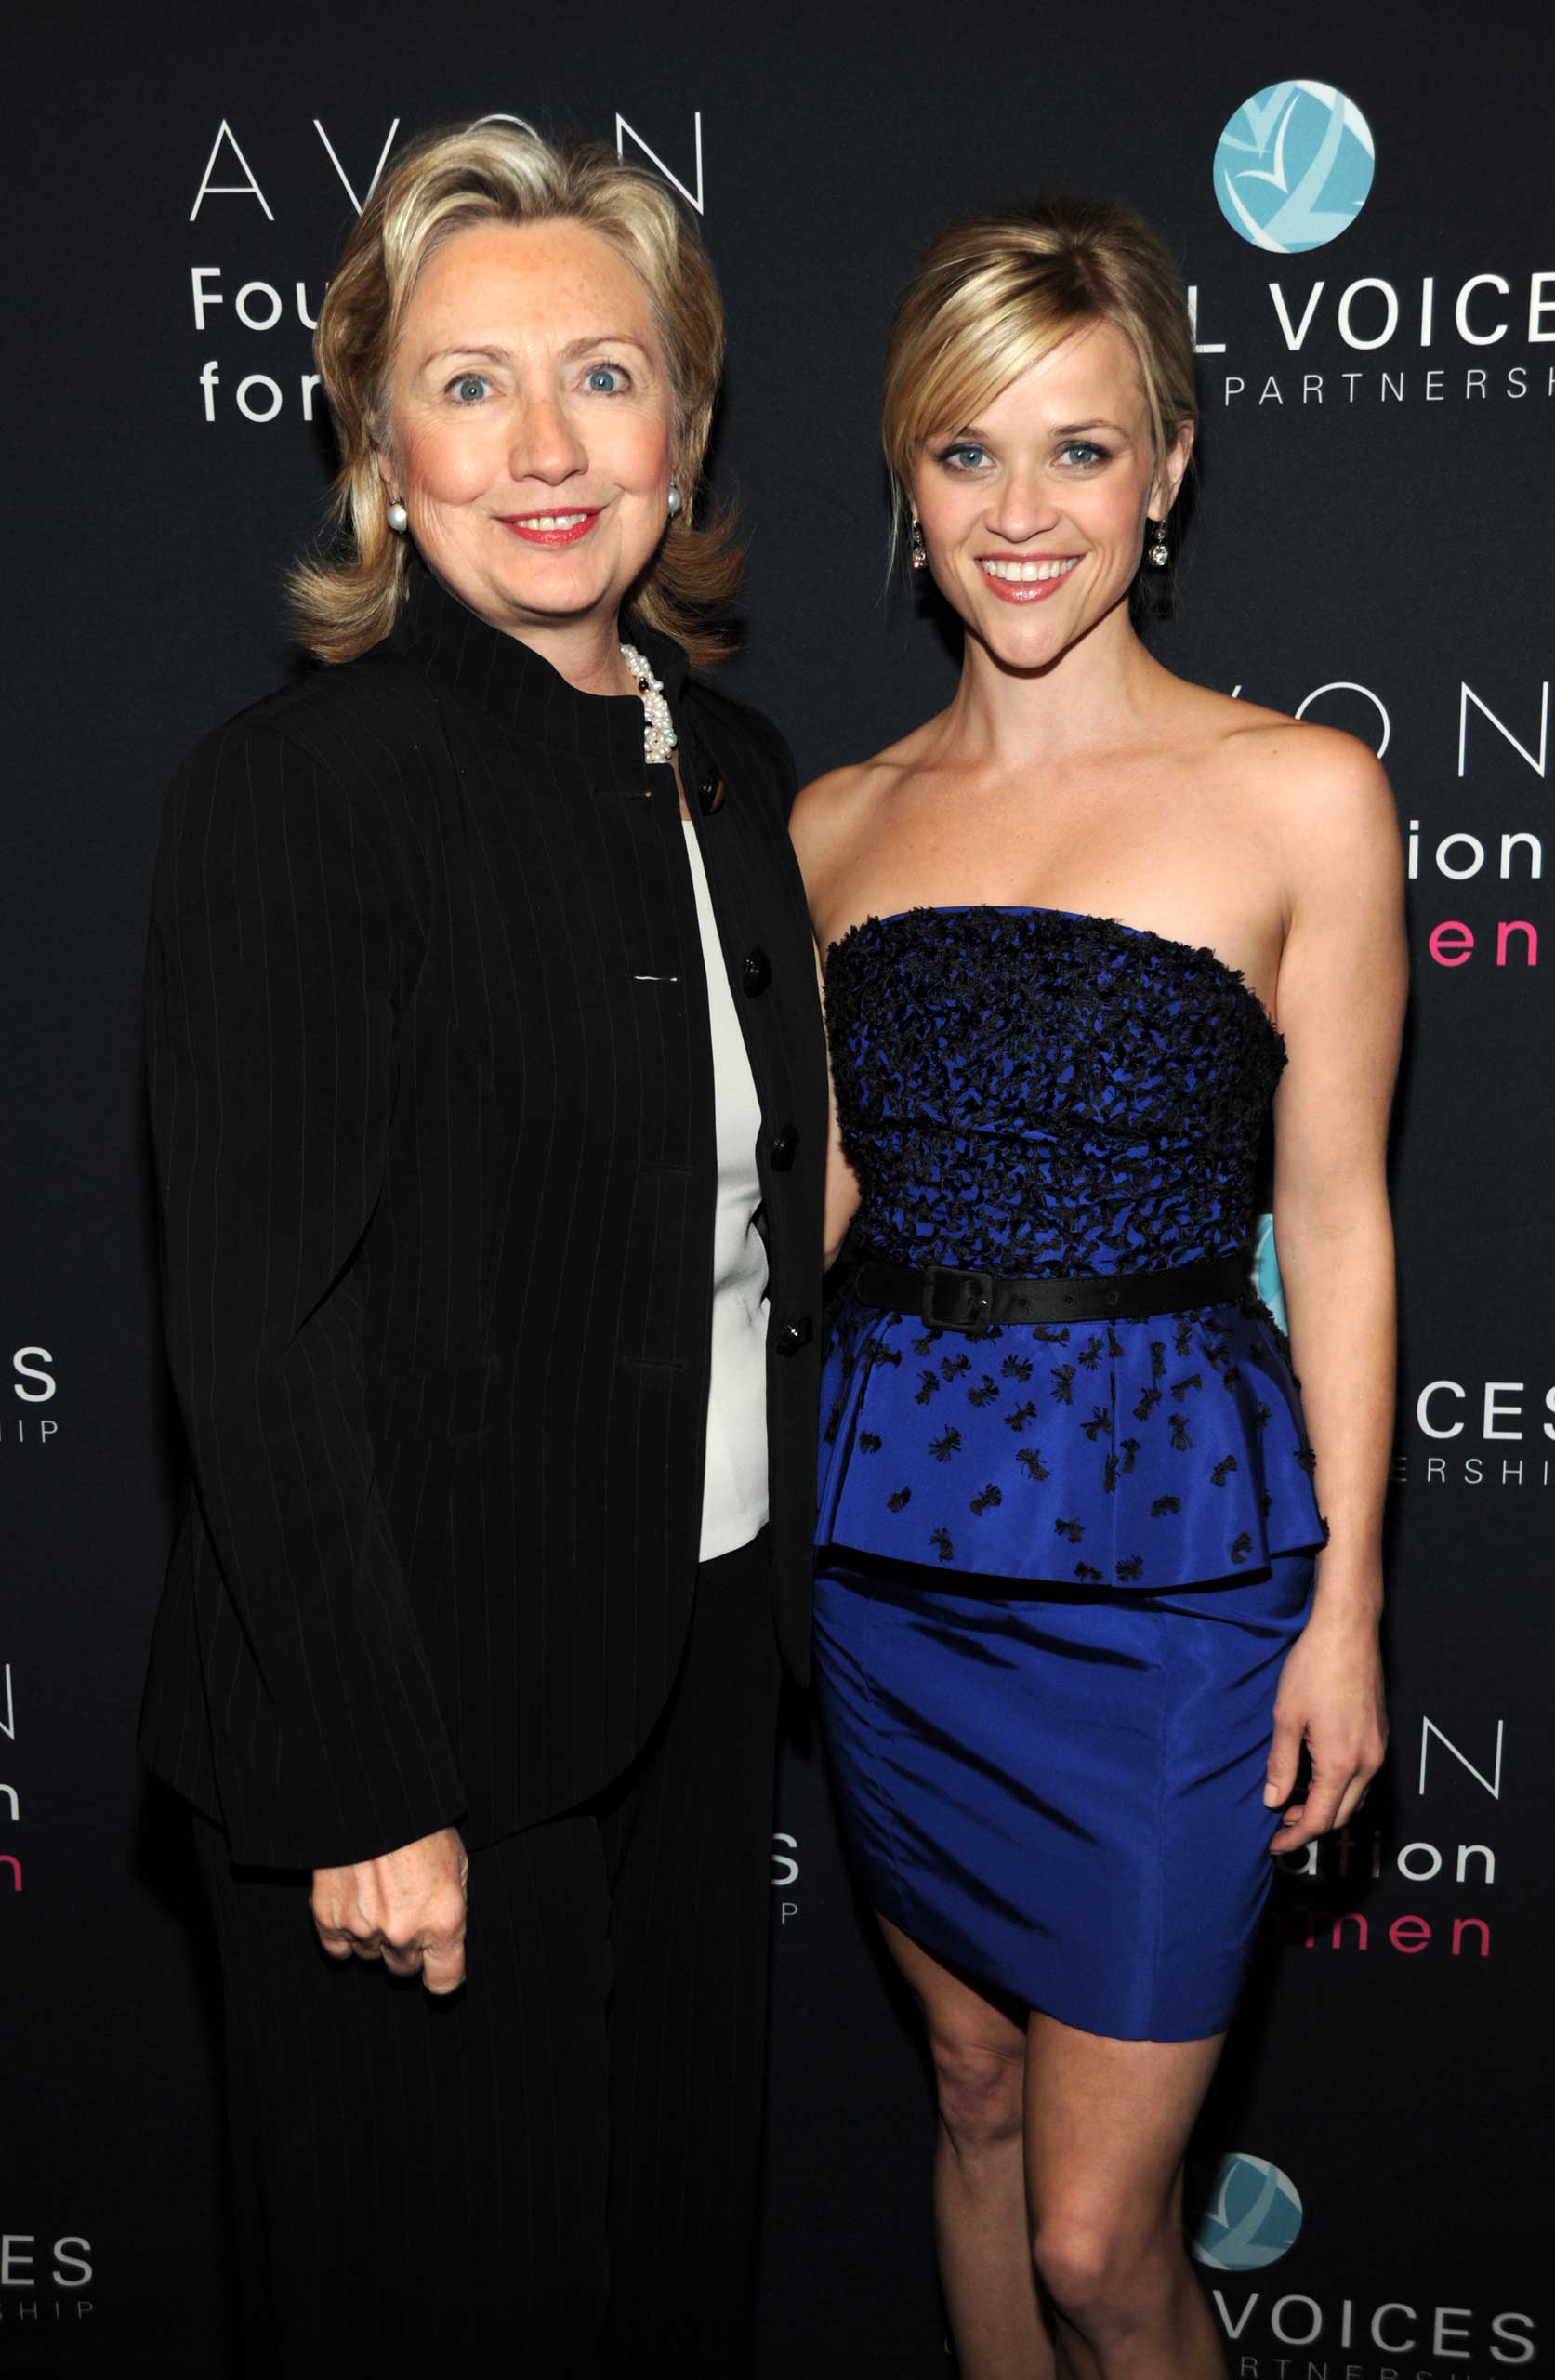 Secretary of State Hillary Clinton and Honorary Chairperson of the Avon Foundation for Women Reese Witherspoon attends Vital Voices 2010 Global Leadership Awards at The Kennedy Center in Washington, DC., on March 10, 2010. (Kevin Mazur—Getty Images)